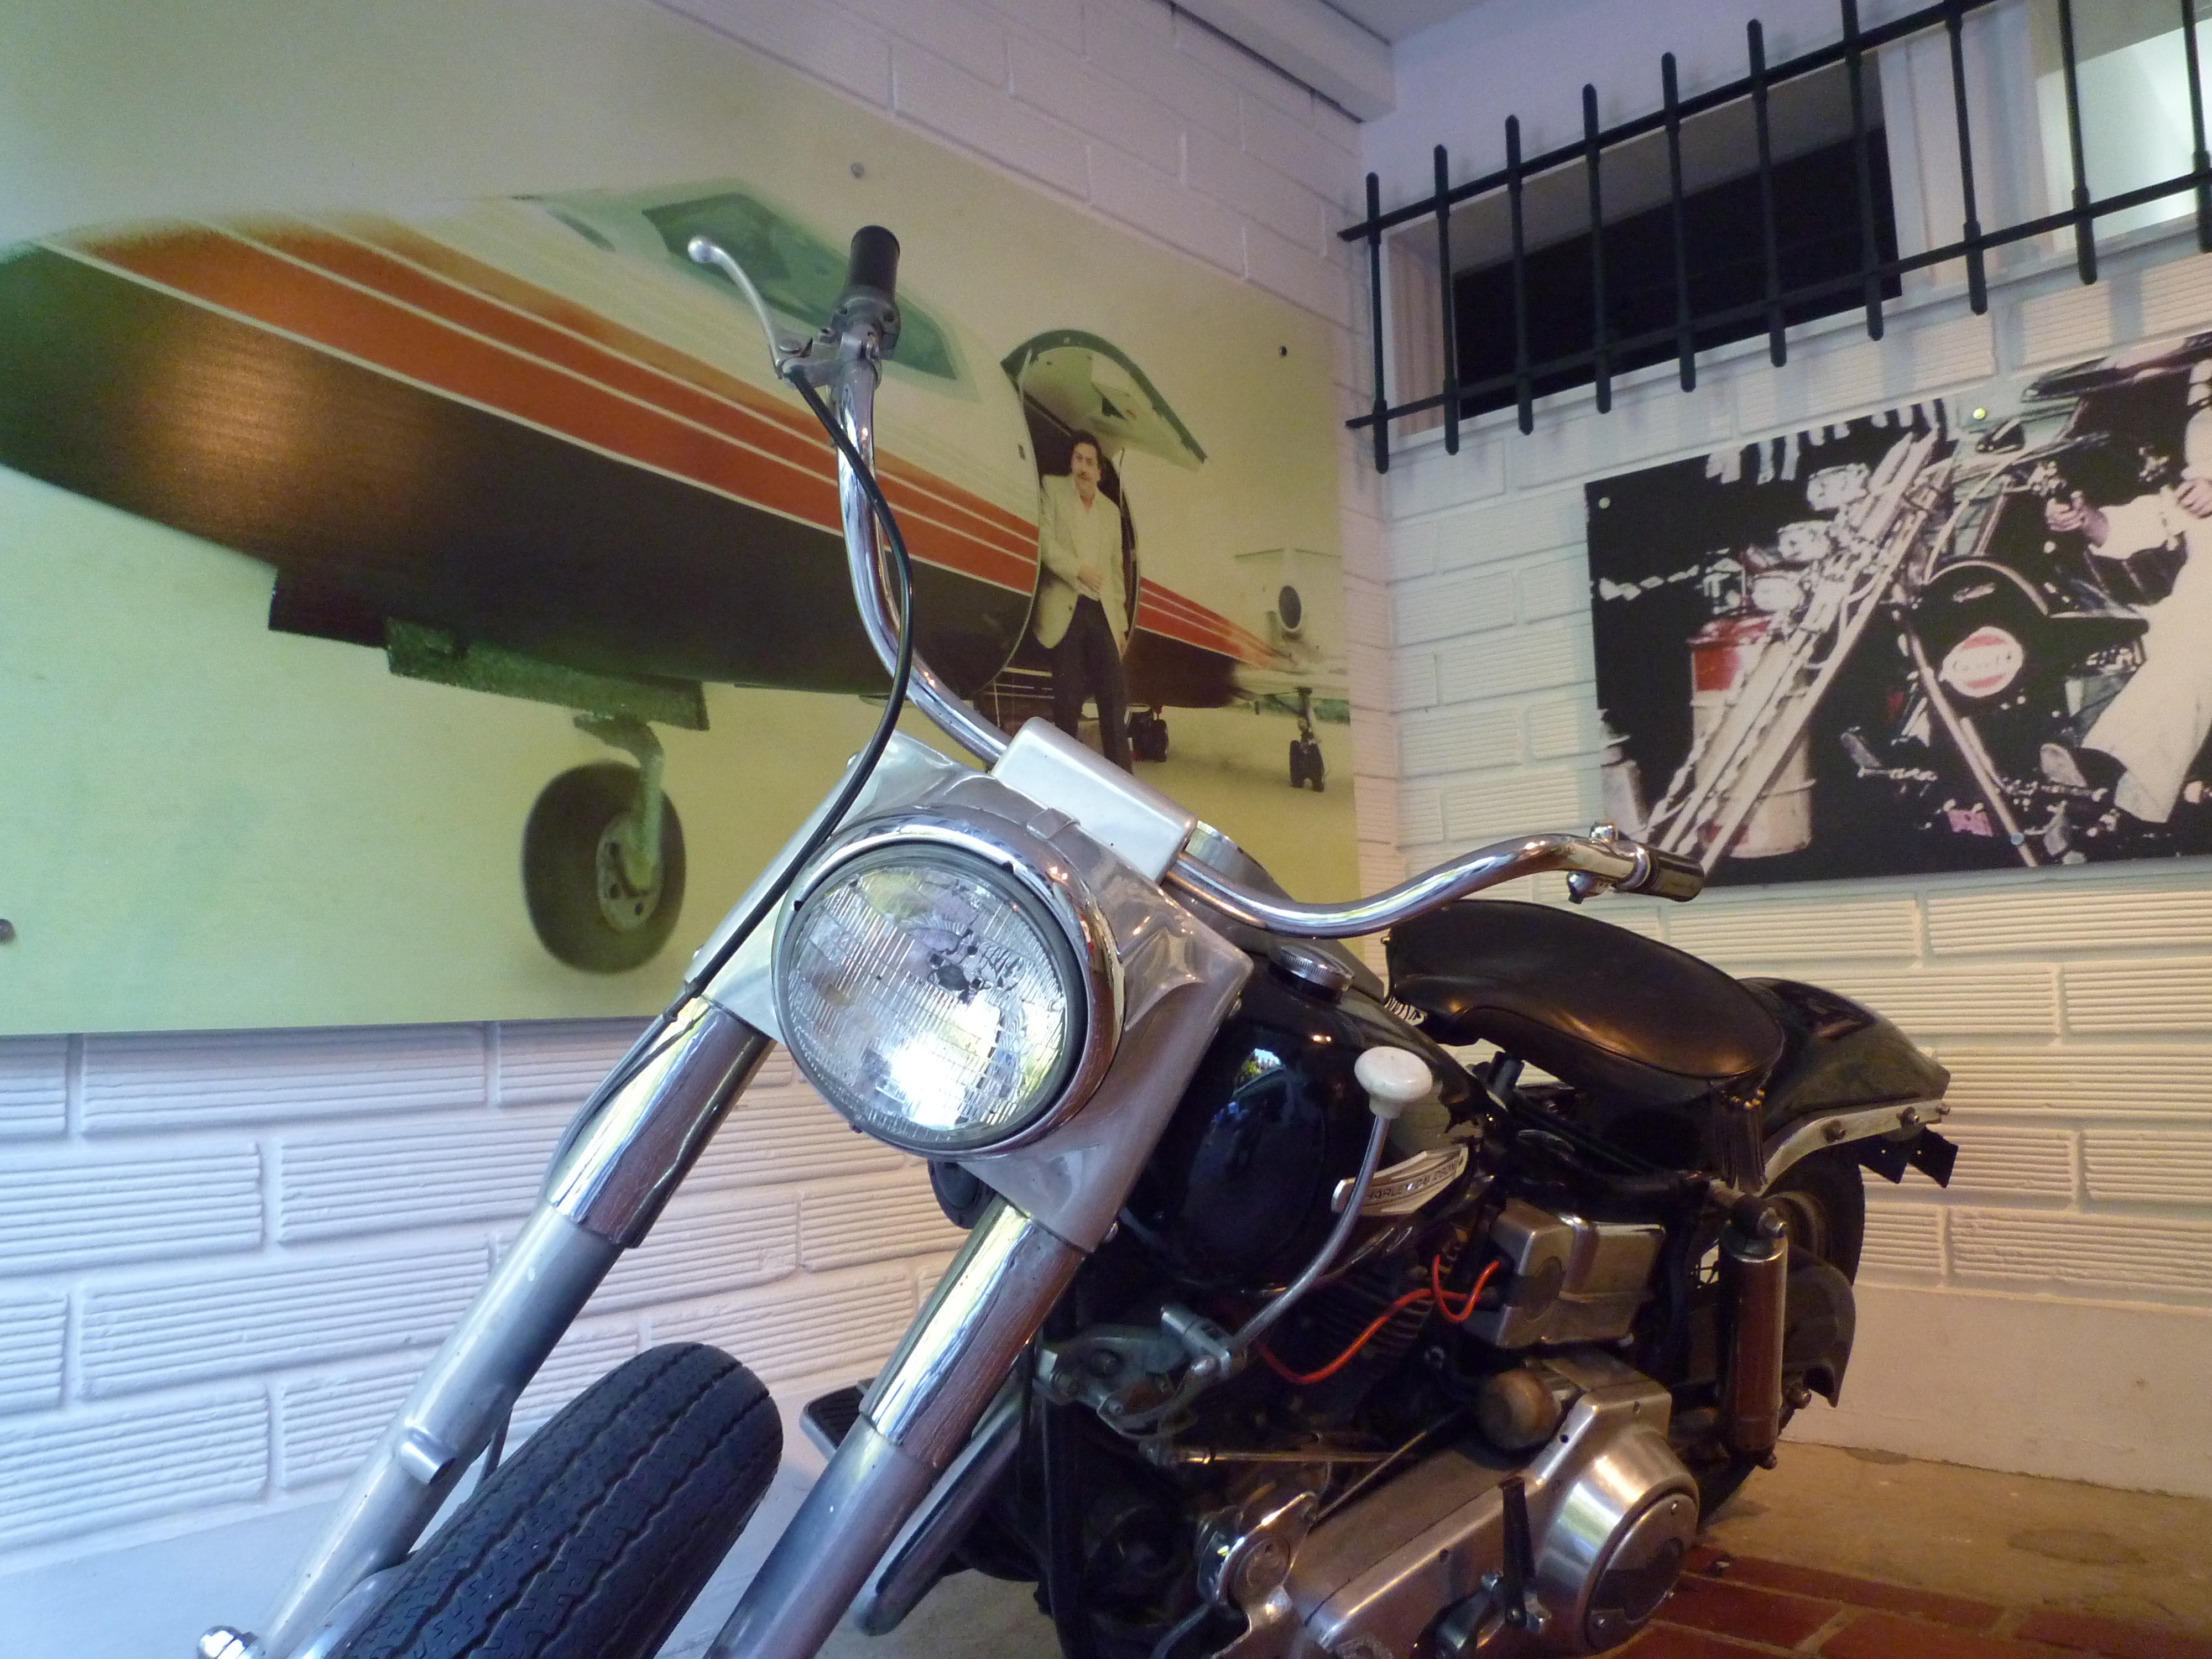 A Harley Davidson previously owned by Frank Sinatra In the background a picture of Escobar exiting a private jet